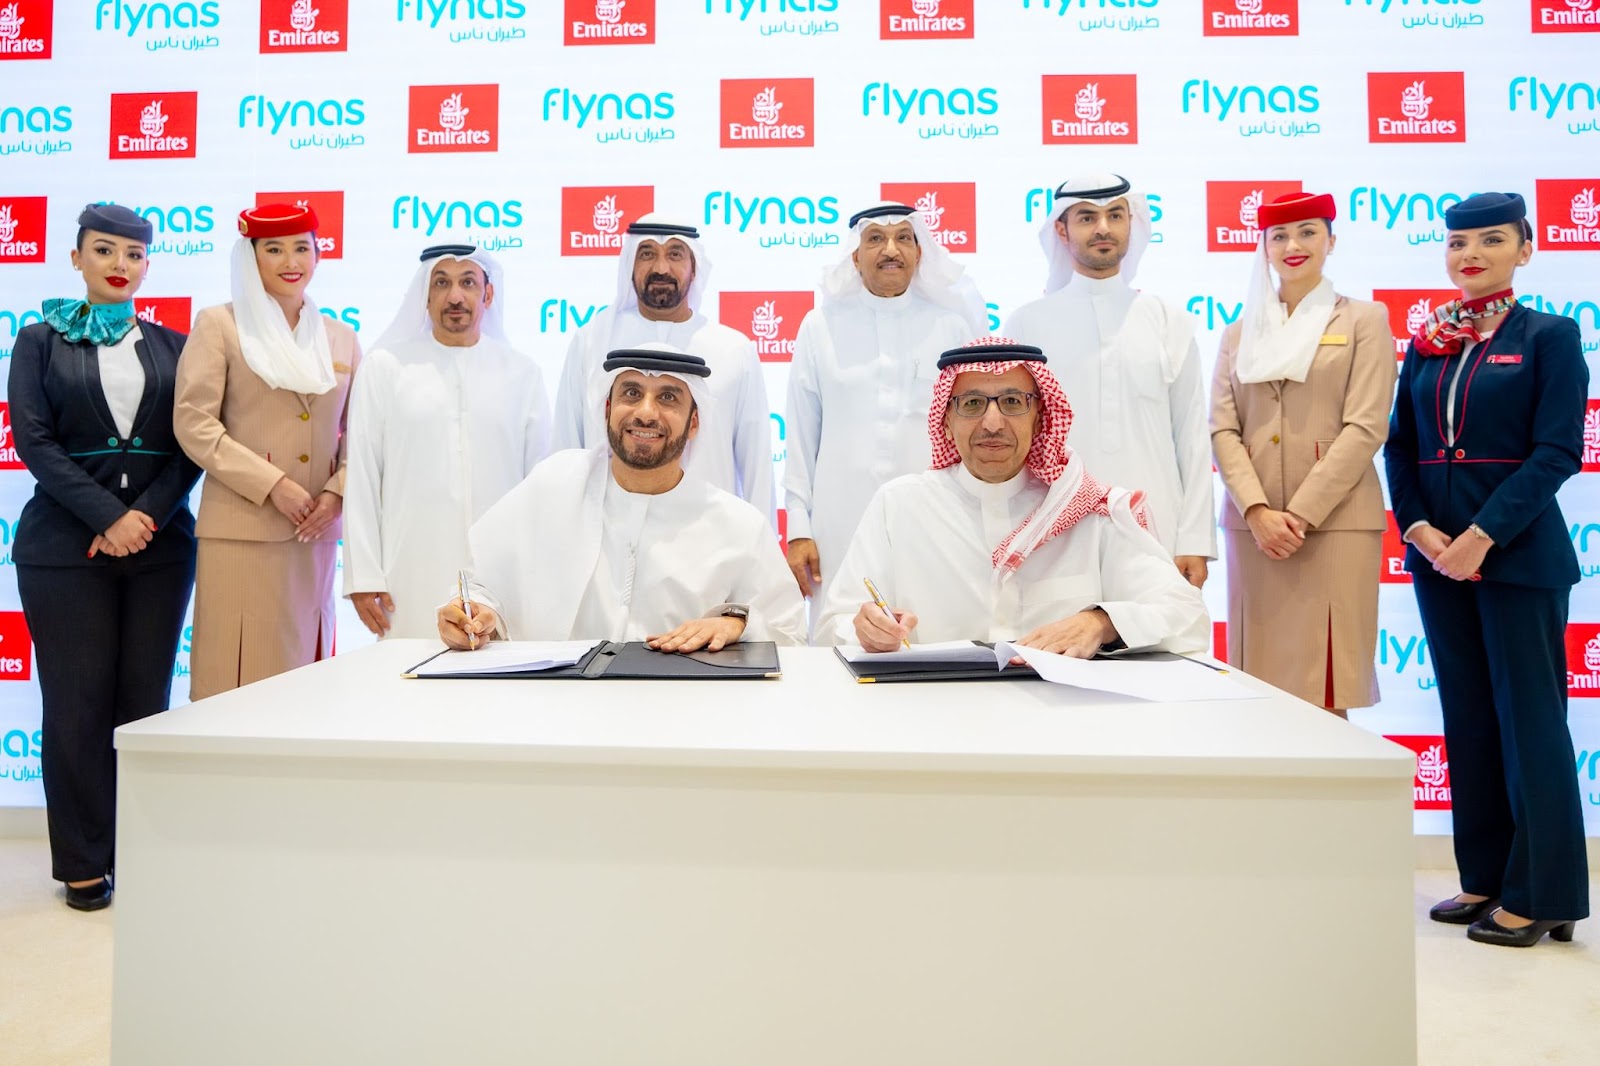 Emirates Enhances Connectivity with Expanded Partnership with flynas, Offering Seamless Saudi Arabia Connections